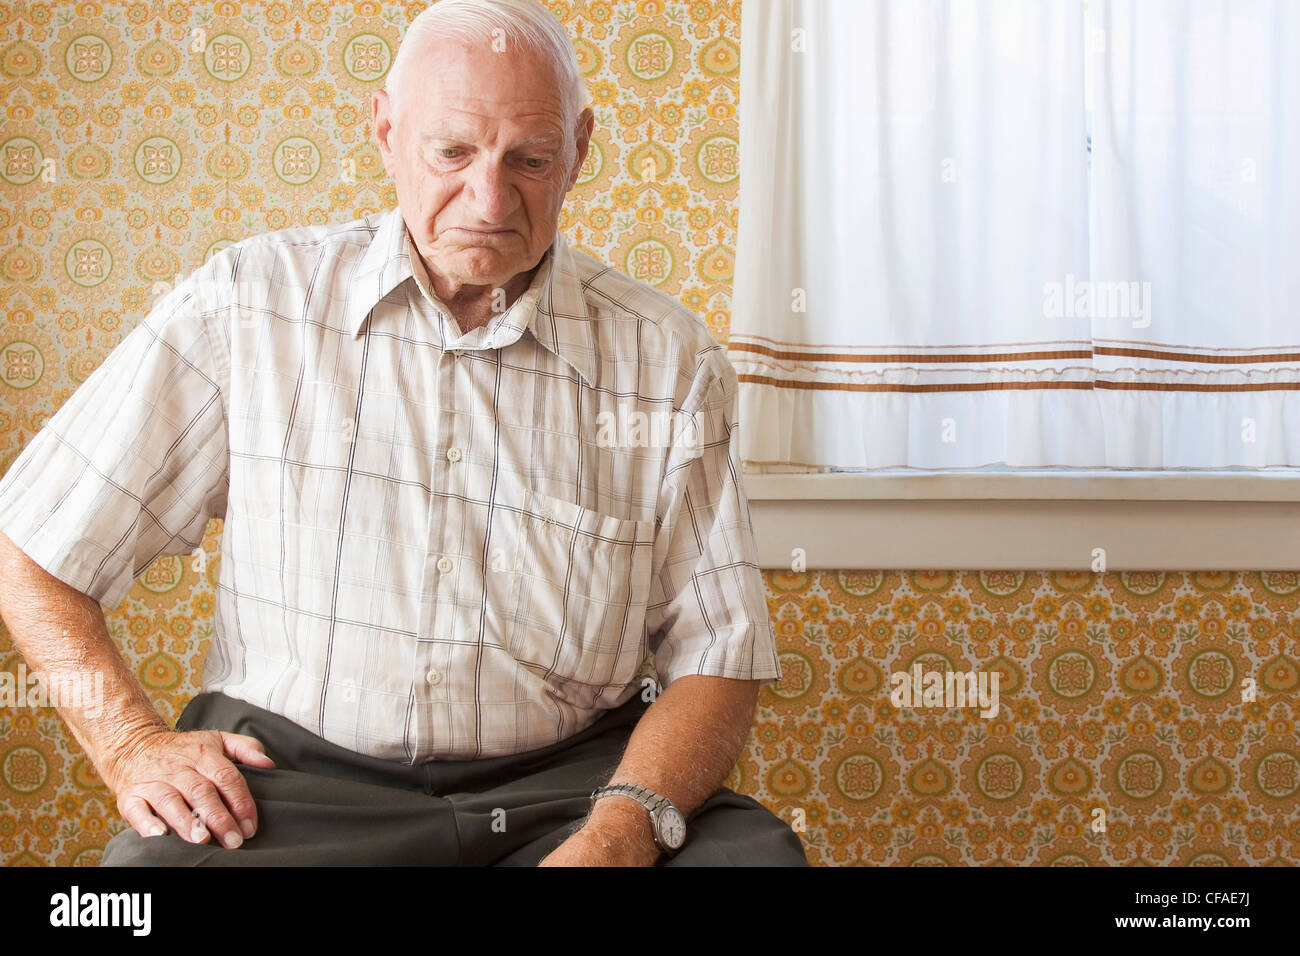 senior citizen (70-80 years old) sitting on chair in vacant house, Canada. Stock Photo